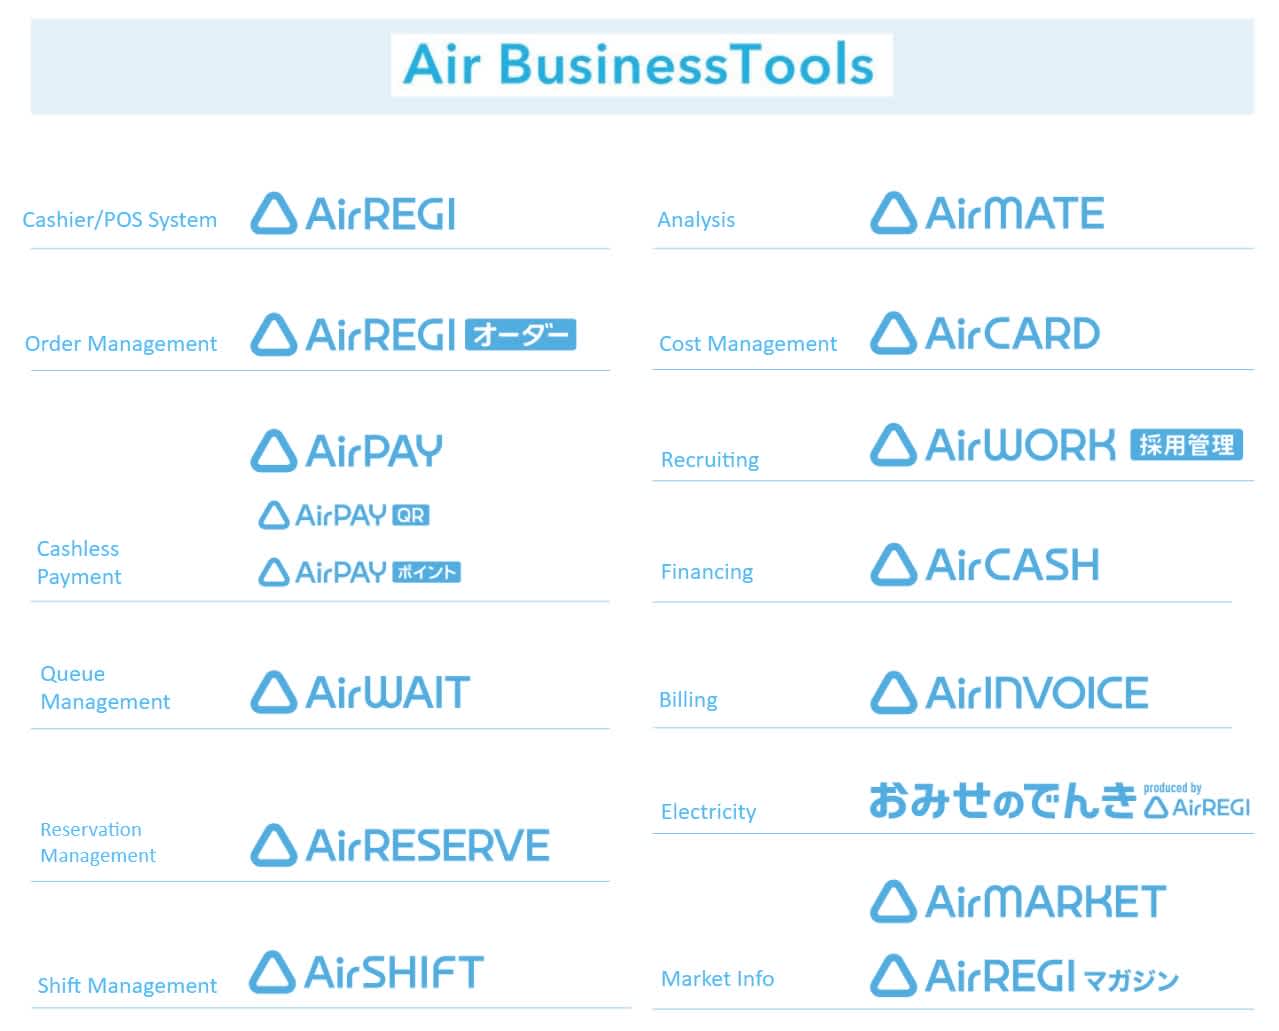 Air Business Tools Overview